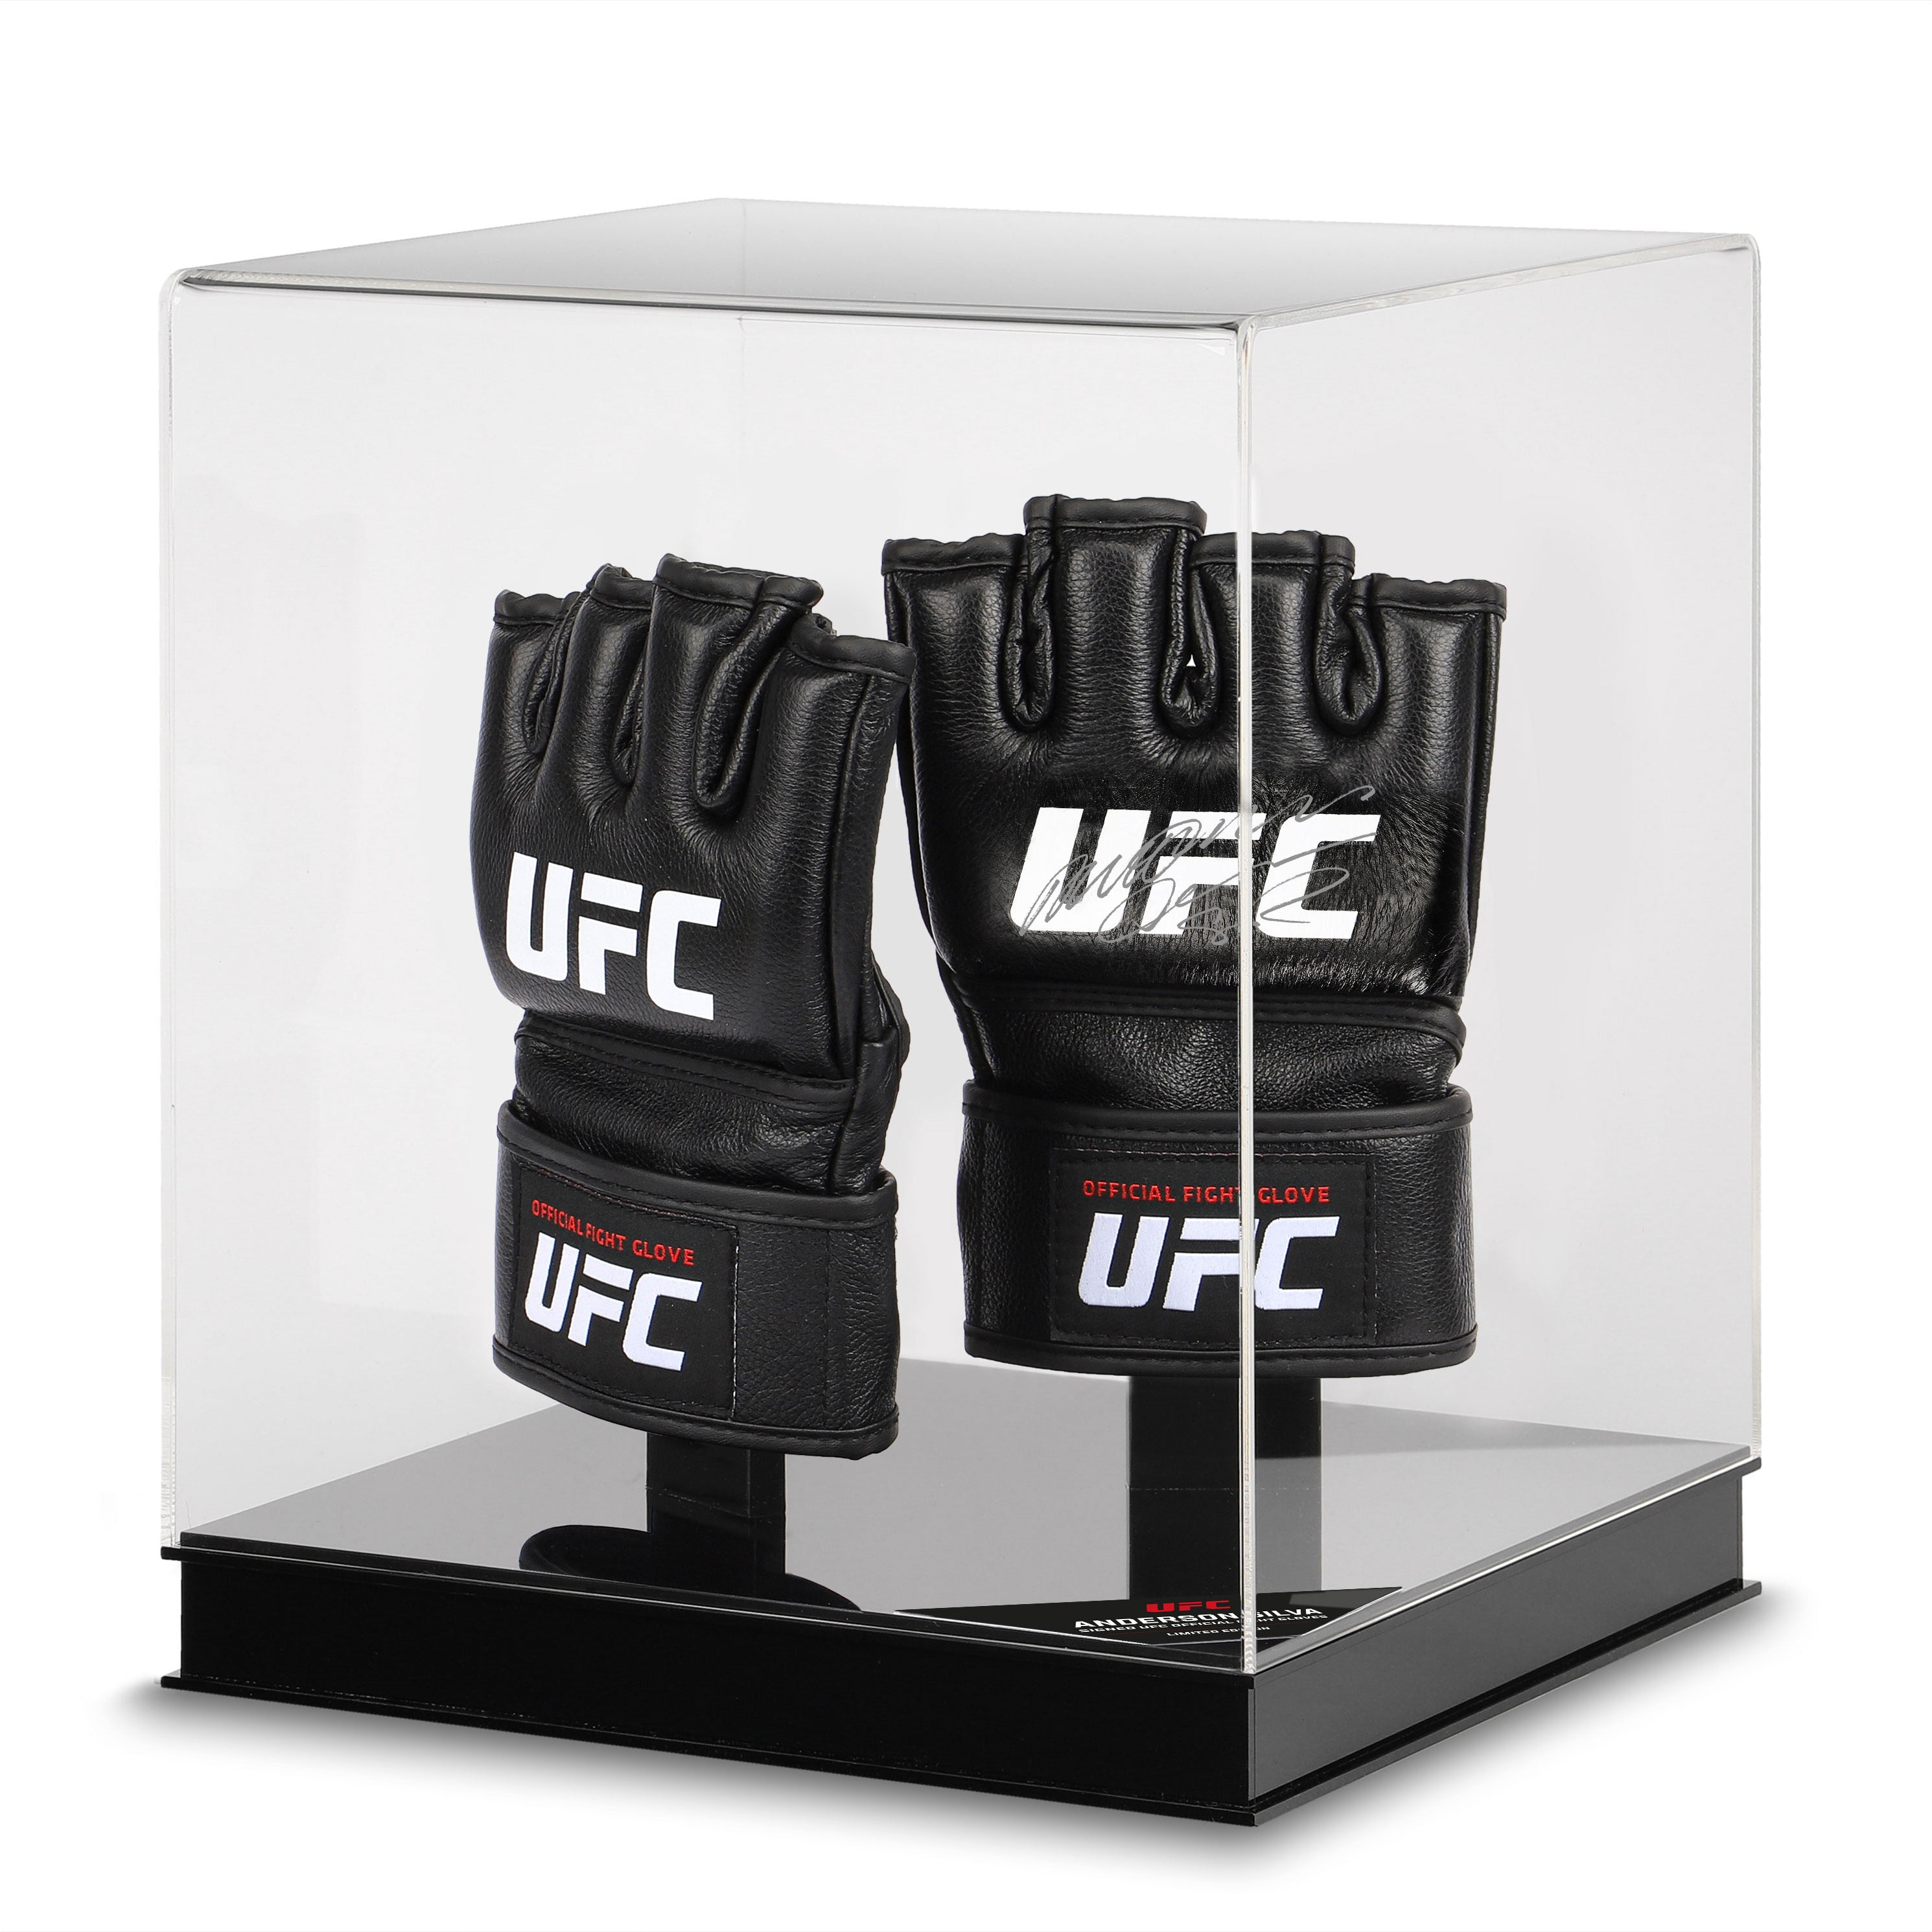 Anderson Silva Signed Official UFC Gloves